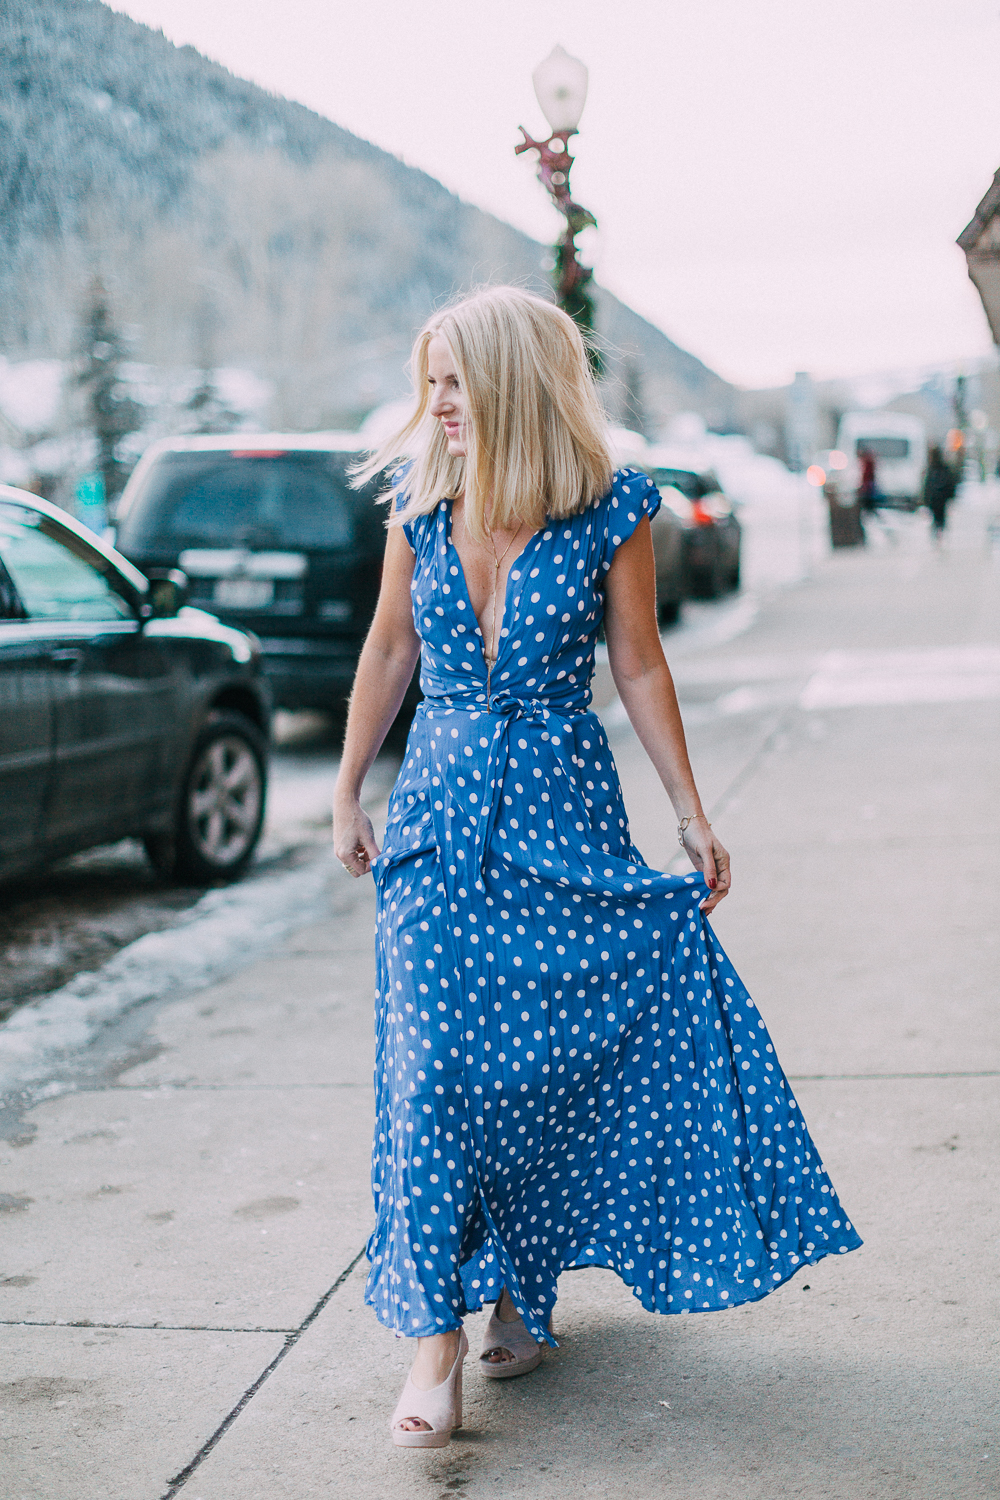 blonde fashion blogger wearing Nude vince camuto platform sandals and blue and white tularosa polka dot maxi dress